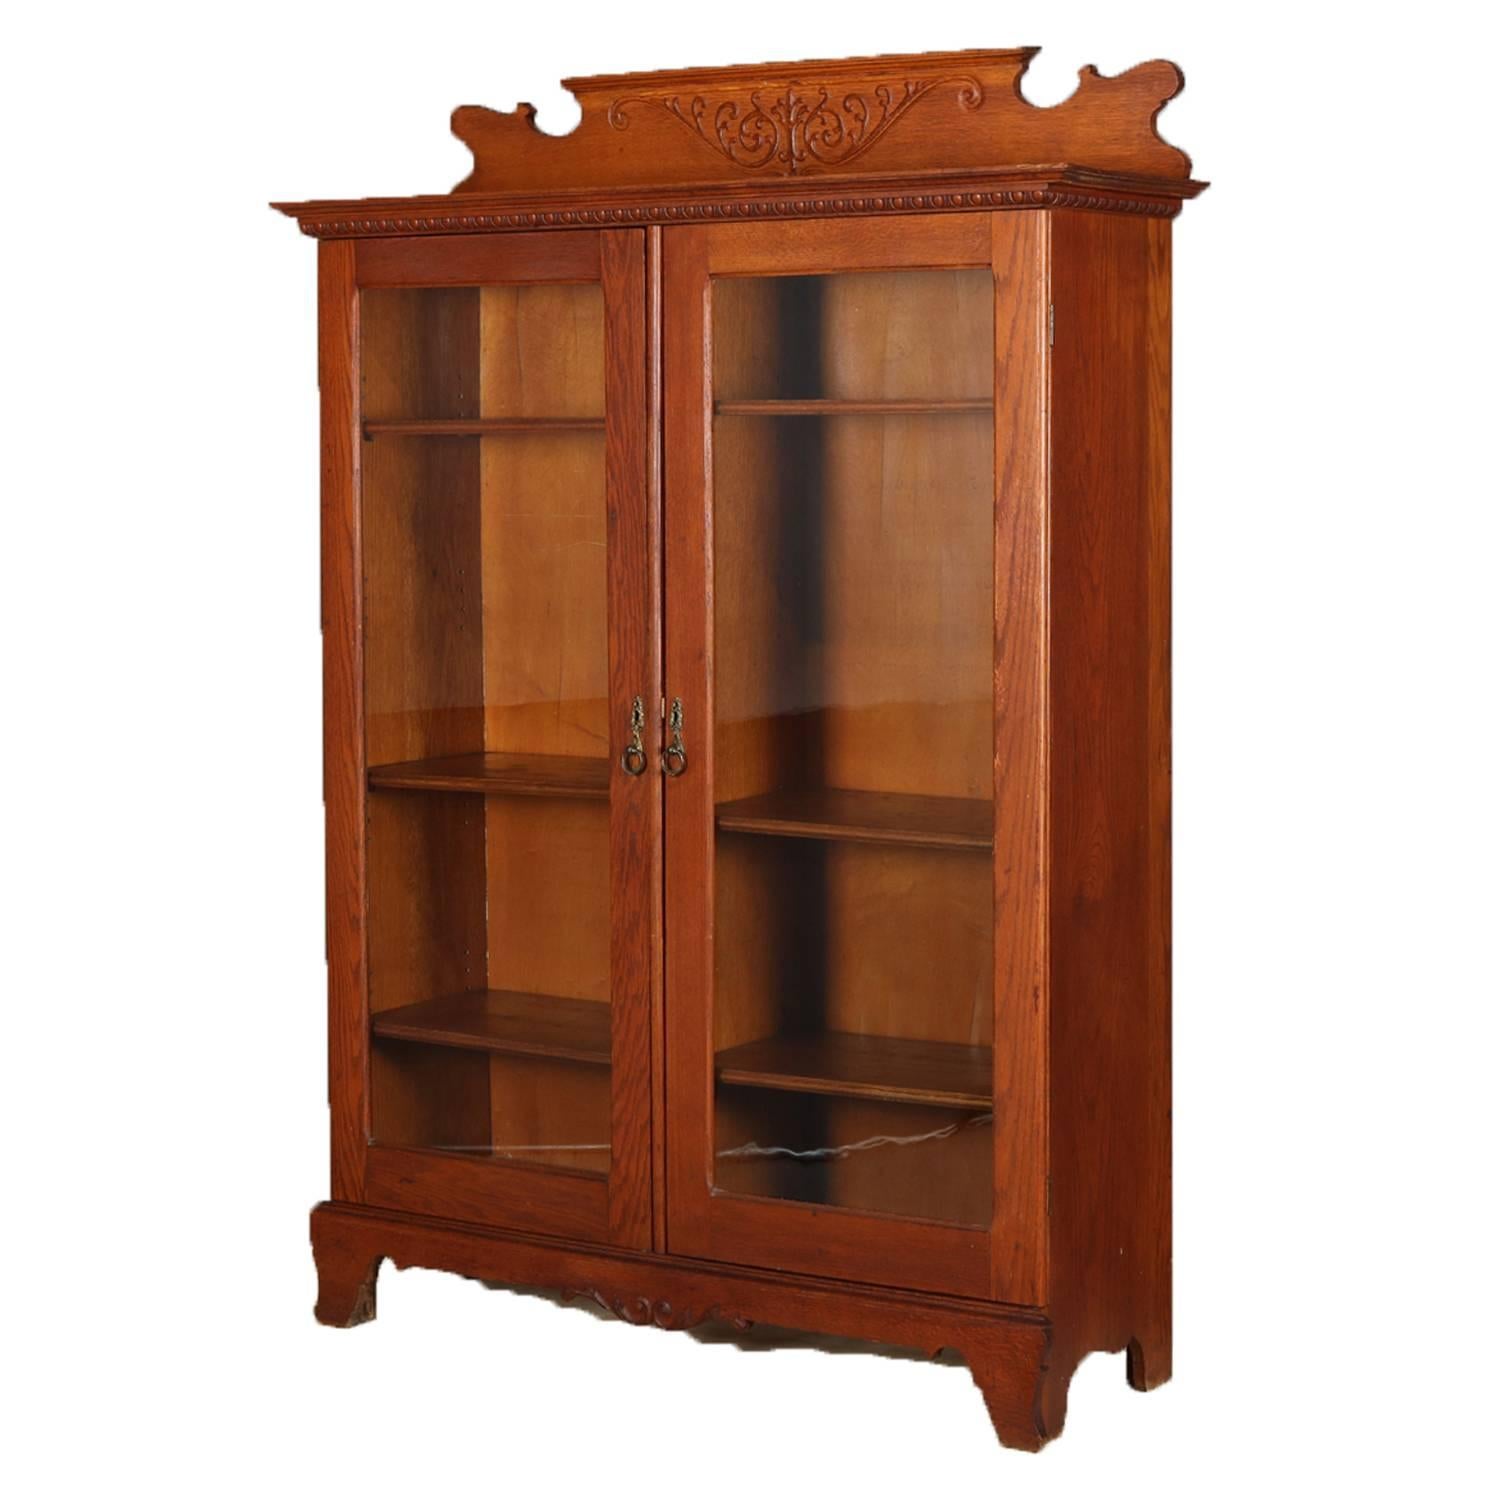 Antique Horner Bros. School oak bookcase features shaped backsplash with incised scroll and foliate motif above case with egg and dart ti-rimming and double glass doors opening to adjustable shelf interior, having shaped skirt flanked by bracket